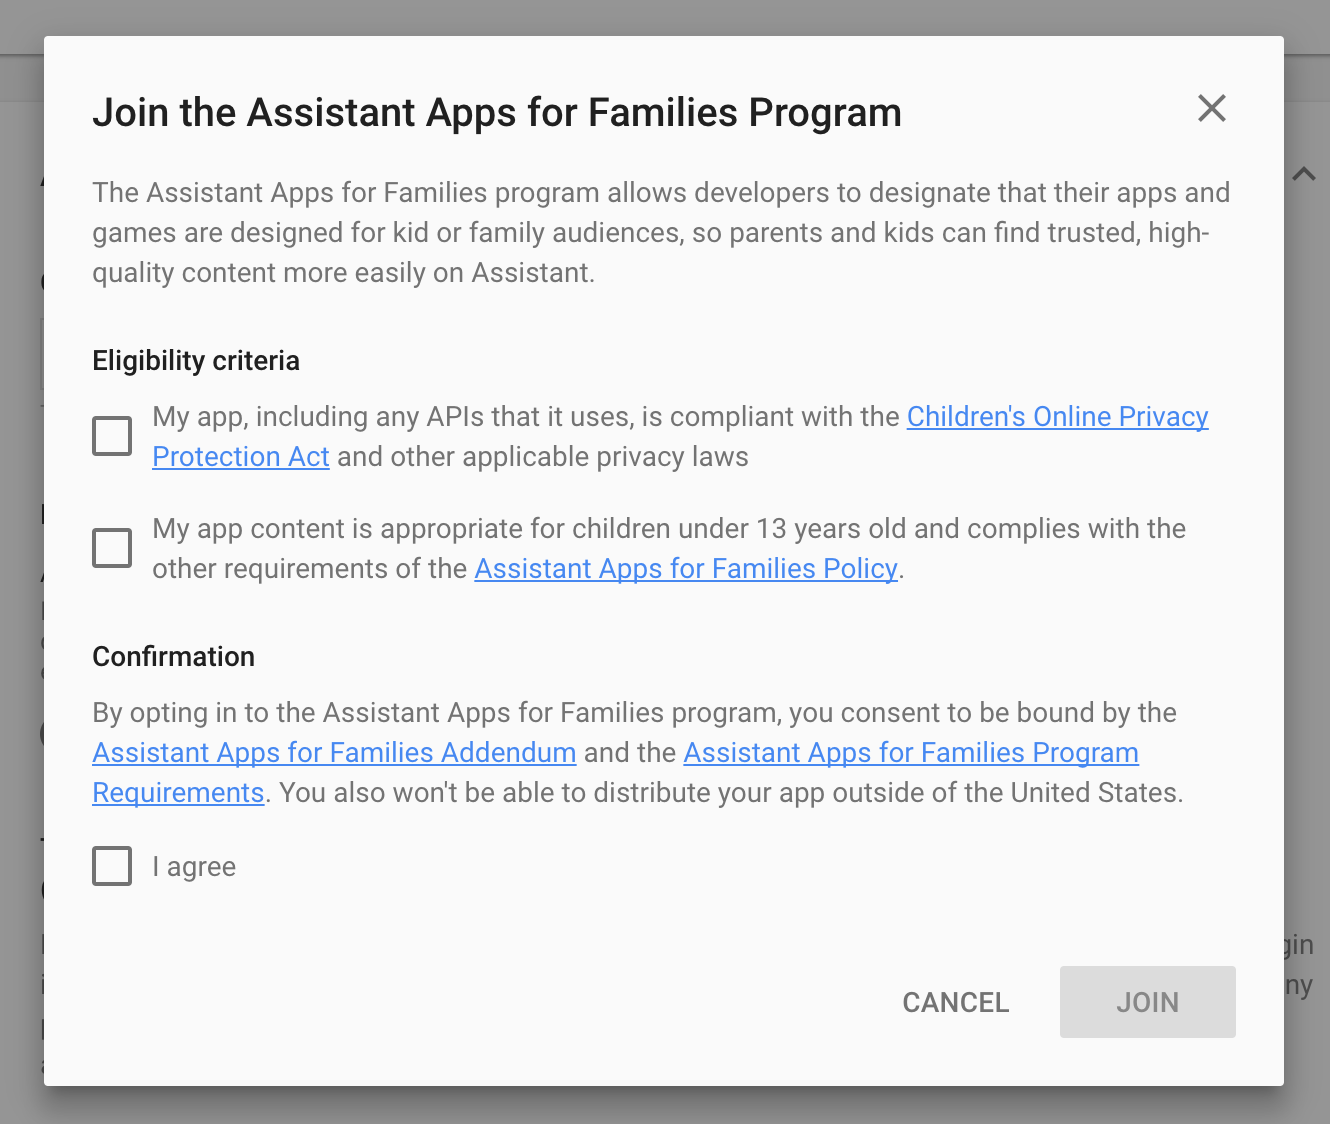 GoogleHome_Join the Assistant Apps for Families Program.png